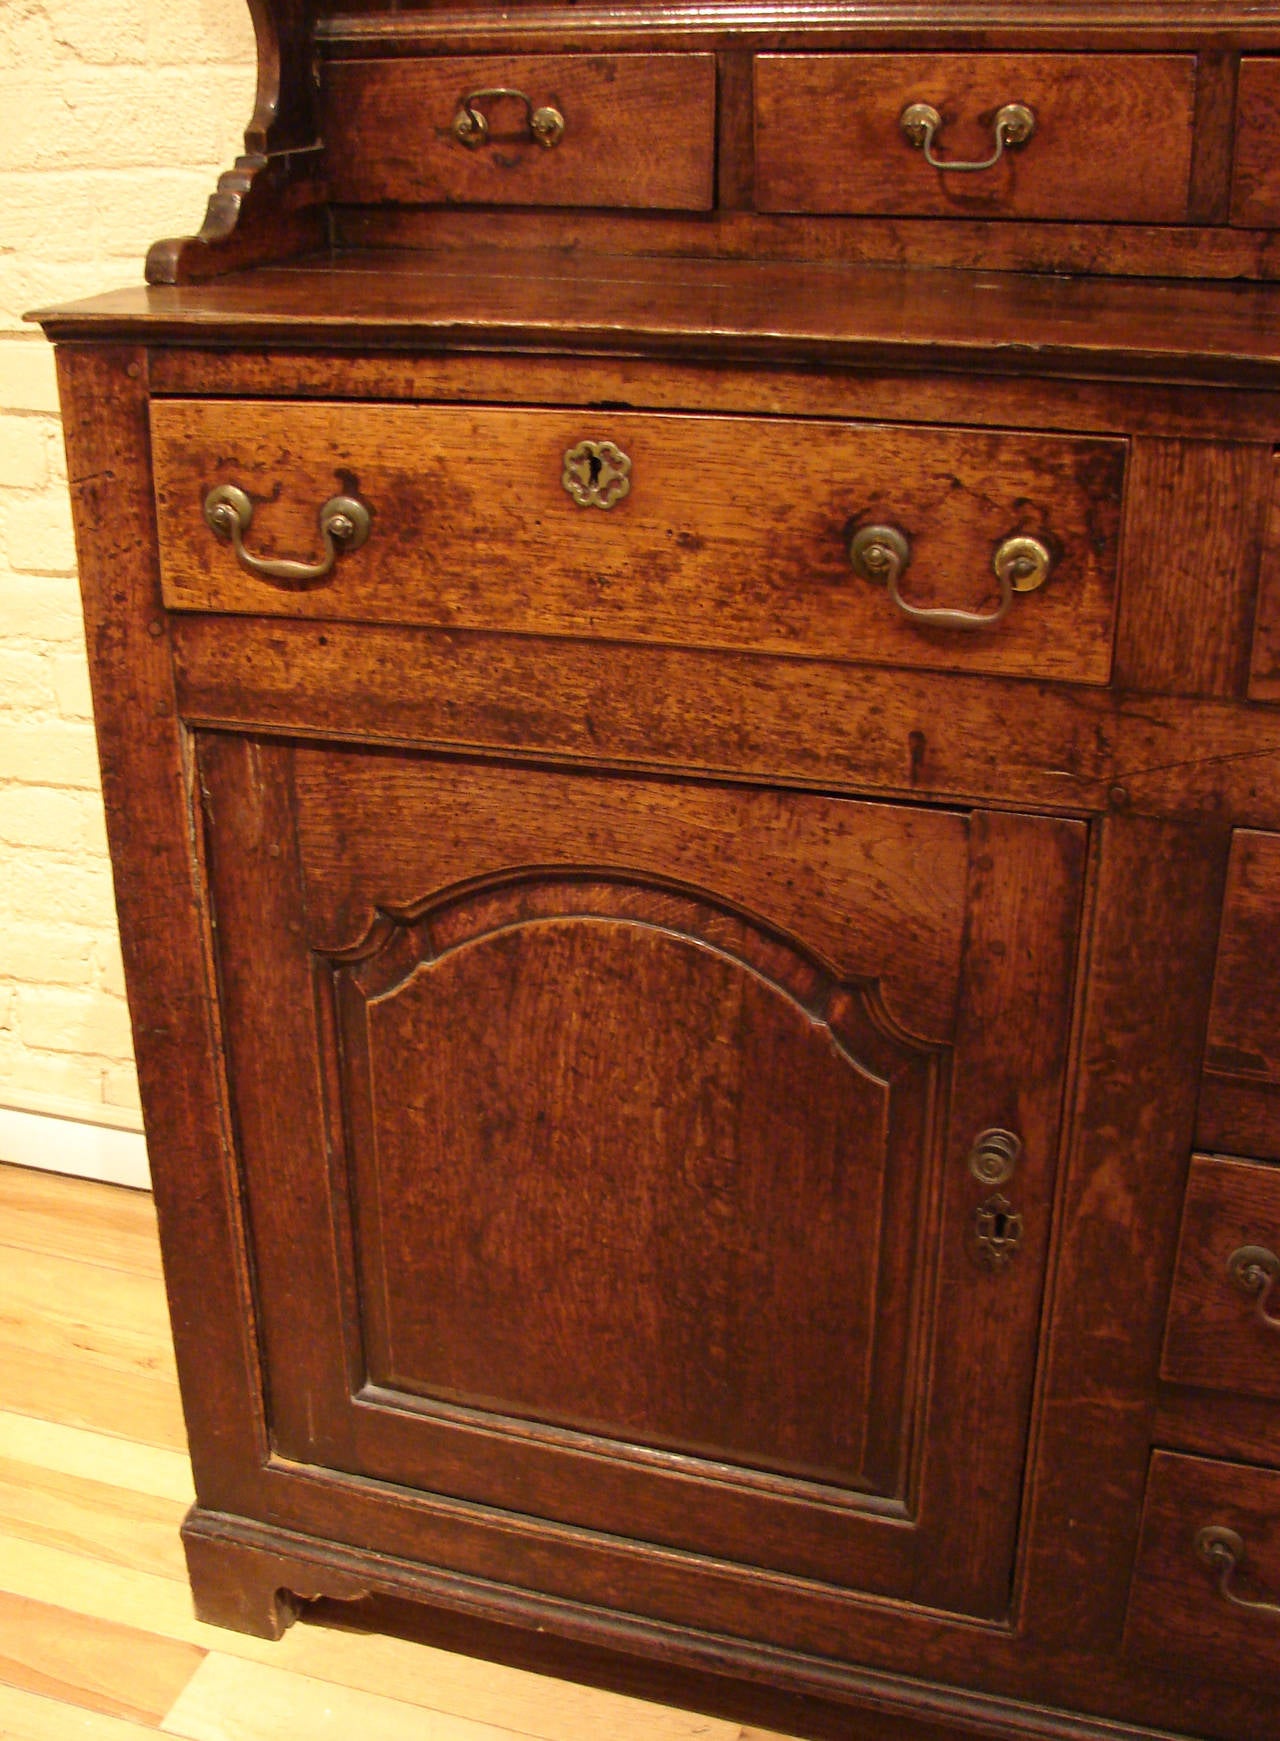 European Large and Spectacular English or Welsh High Dresser